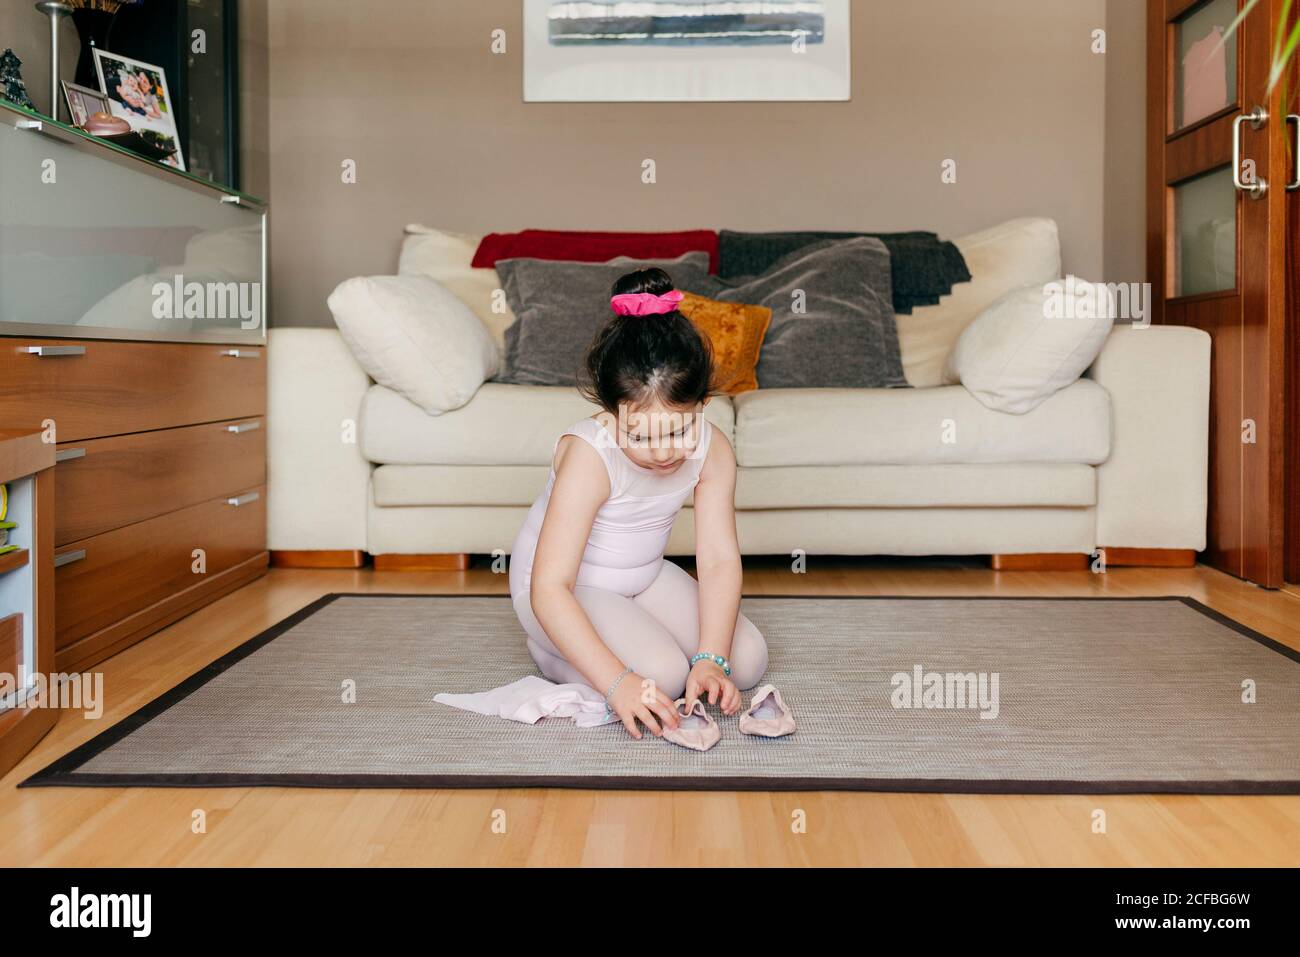 https://c8.alamy.com/comp/2CFBG6W/cute-girl-in-leotard-and-tights-sitting-on-floor-near-sofa-and-putting-on-dance-shoes-before-ballet-rehearsal-at-home-2CFBG6W.jpg